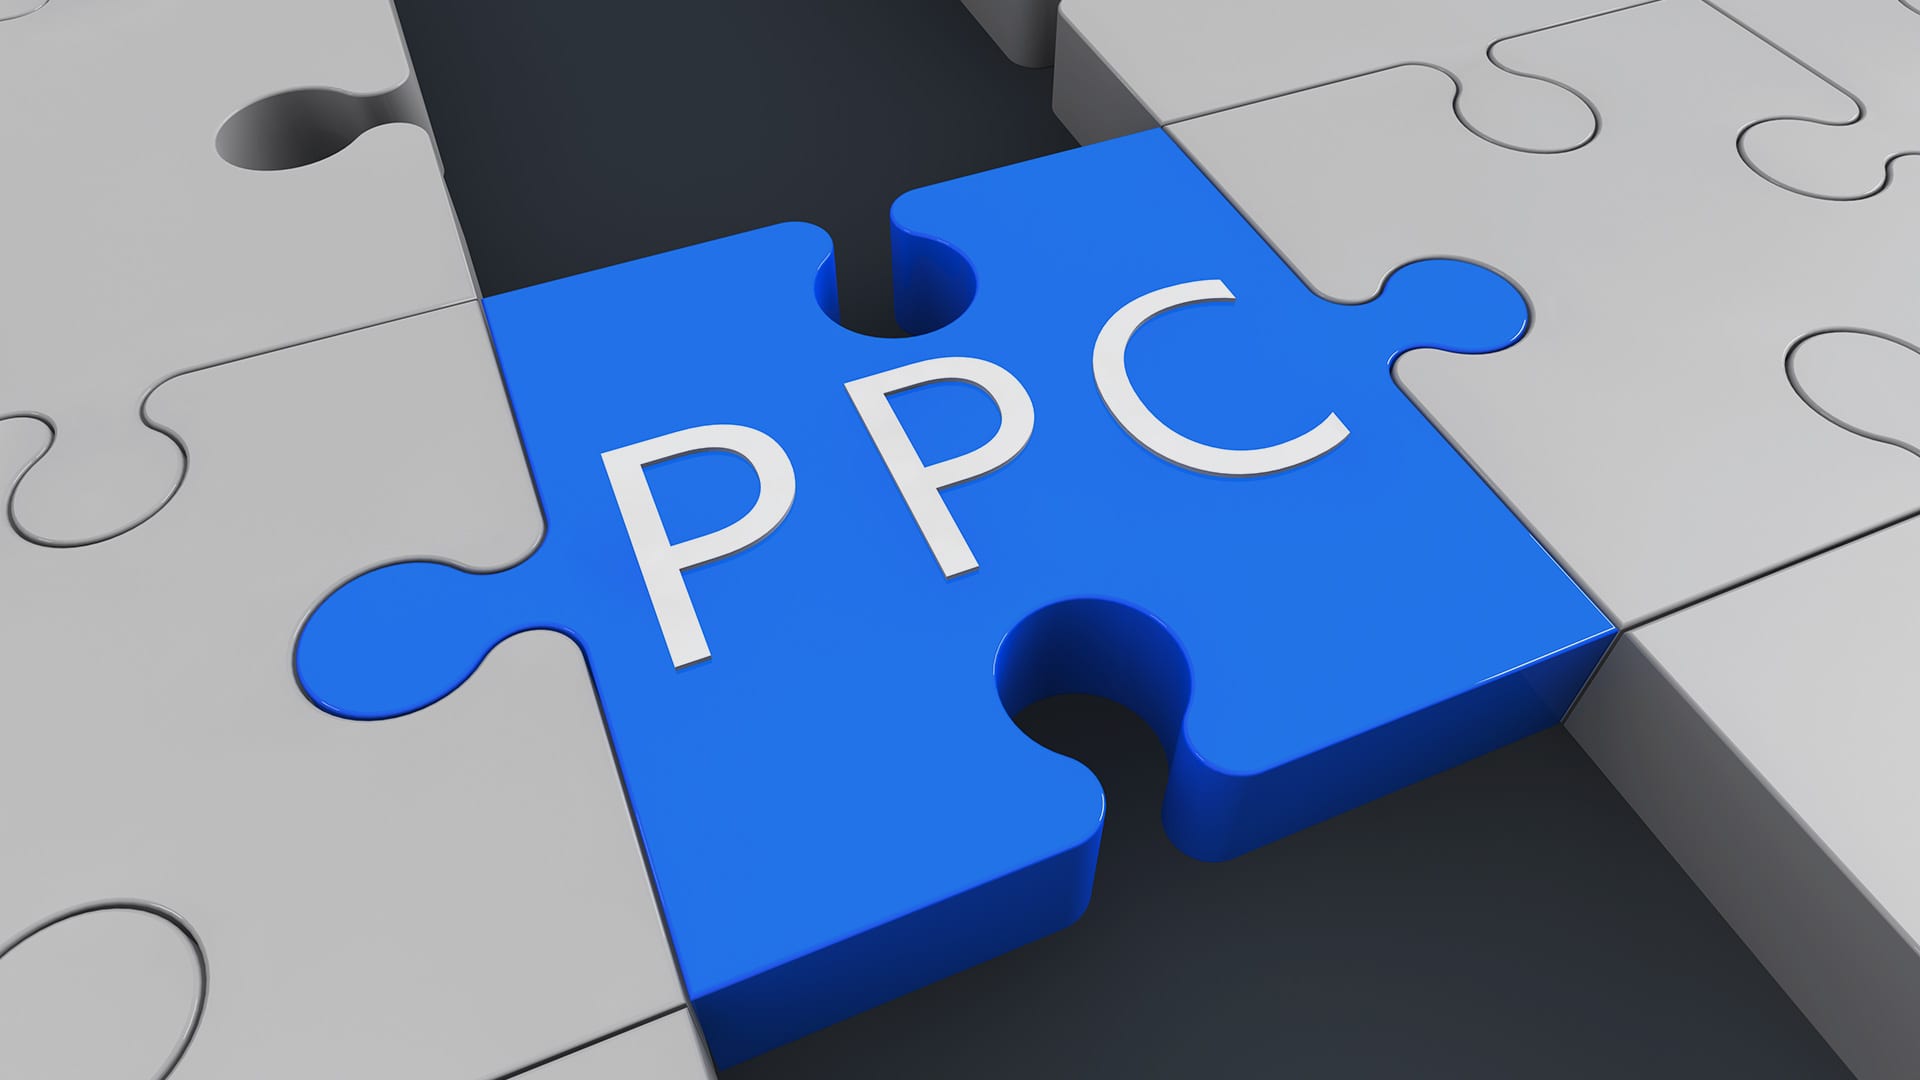 The best ppc practices • VBOUT